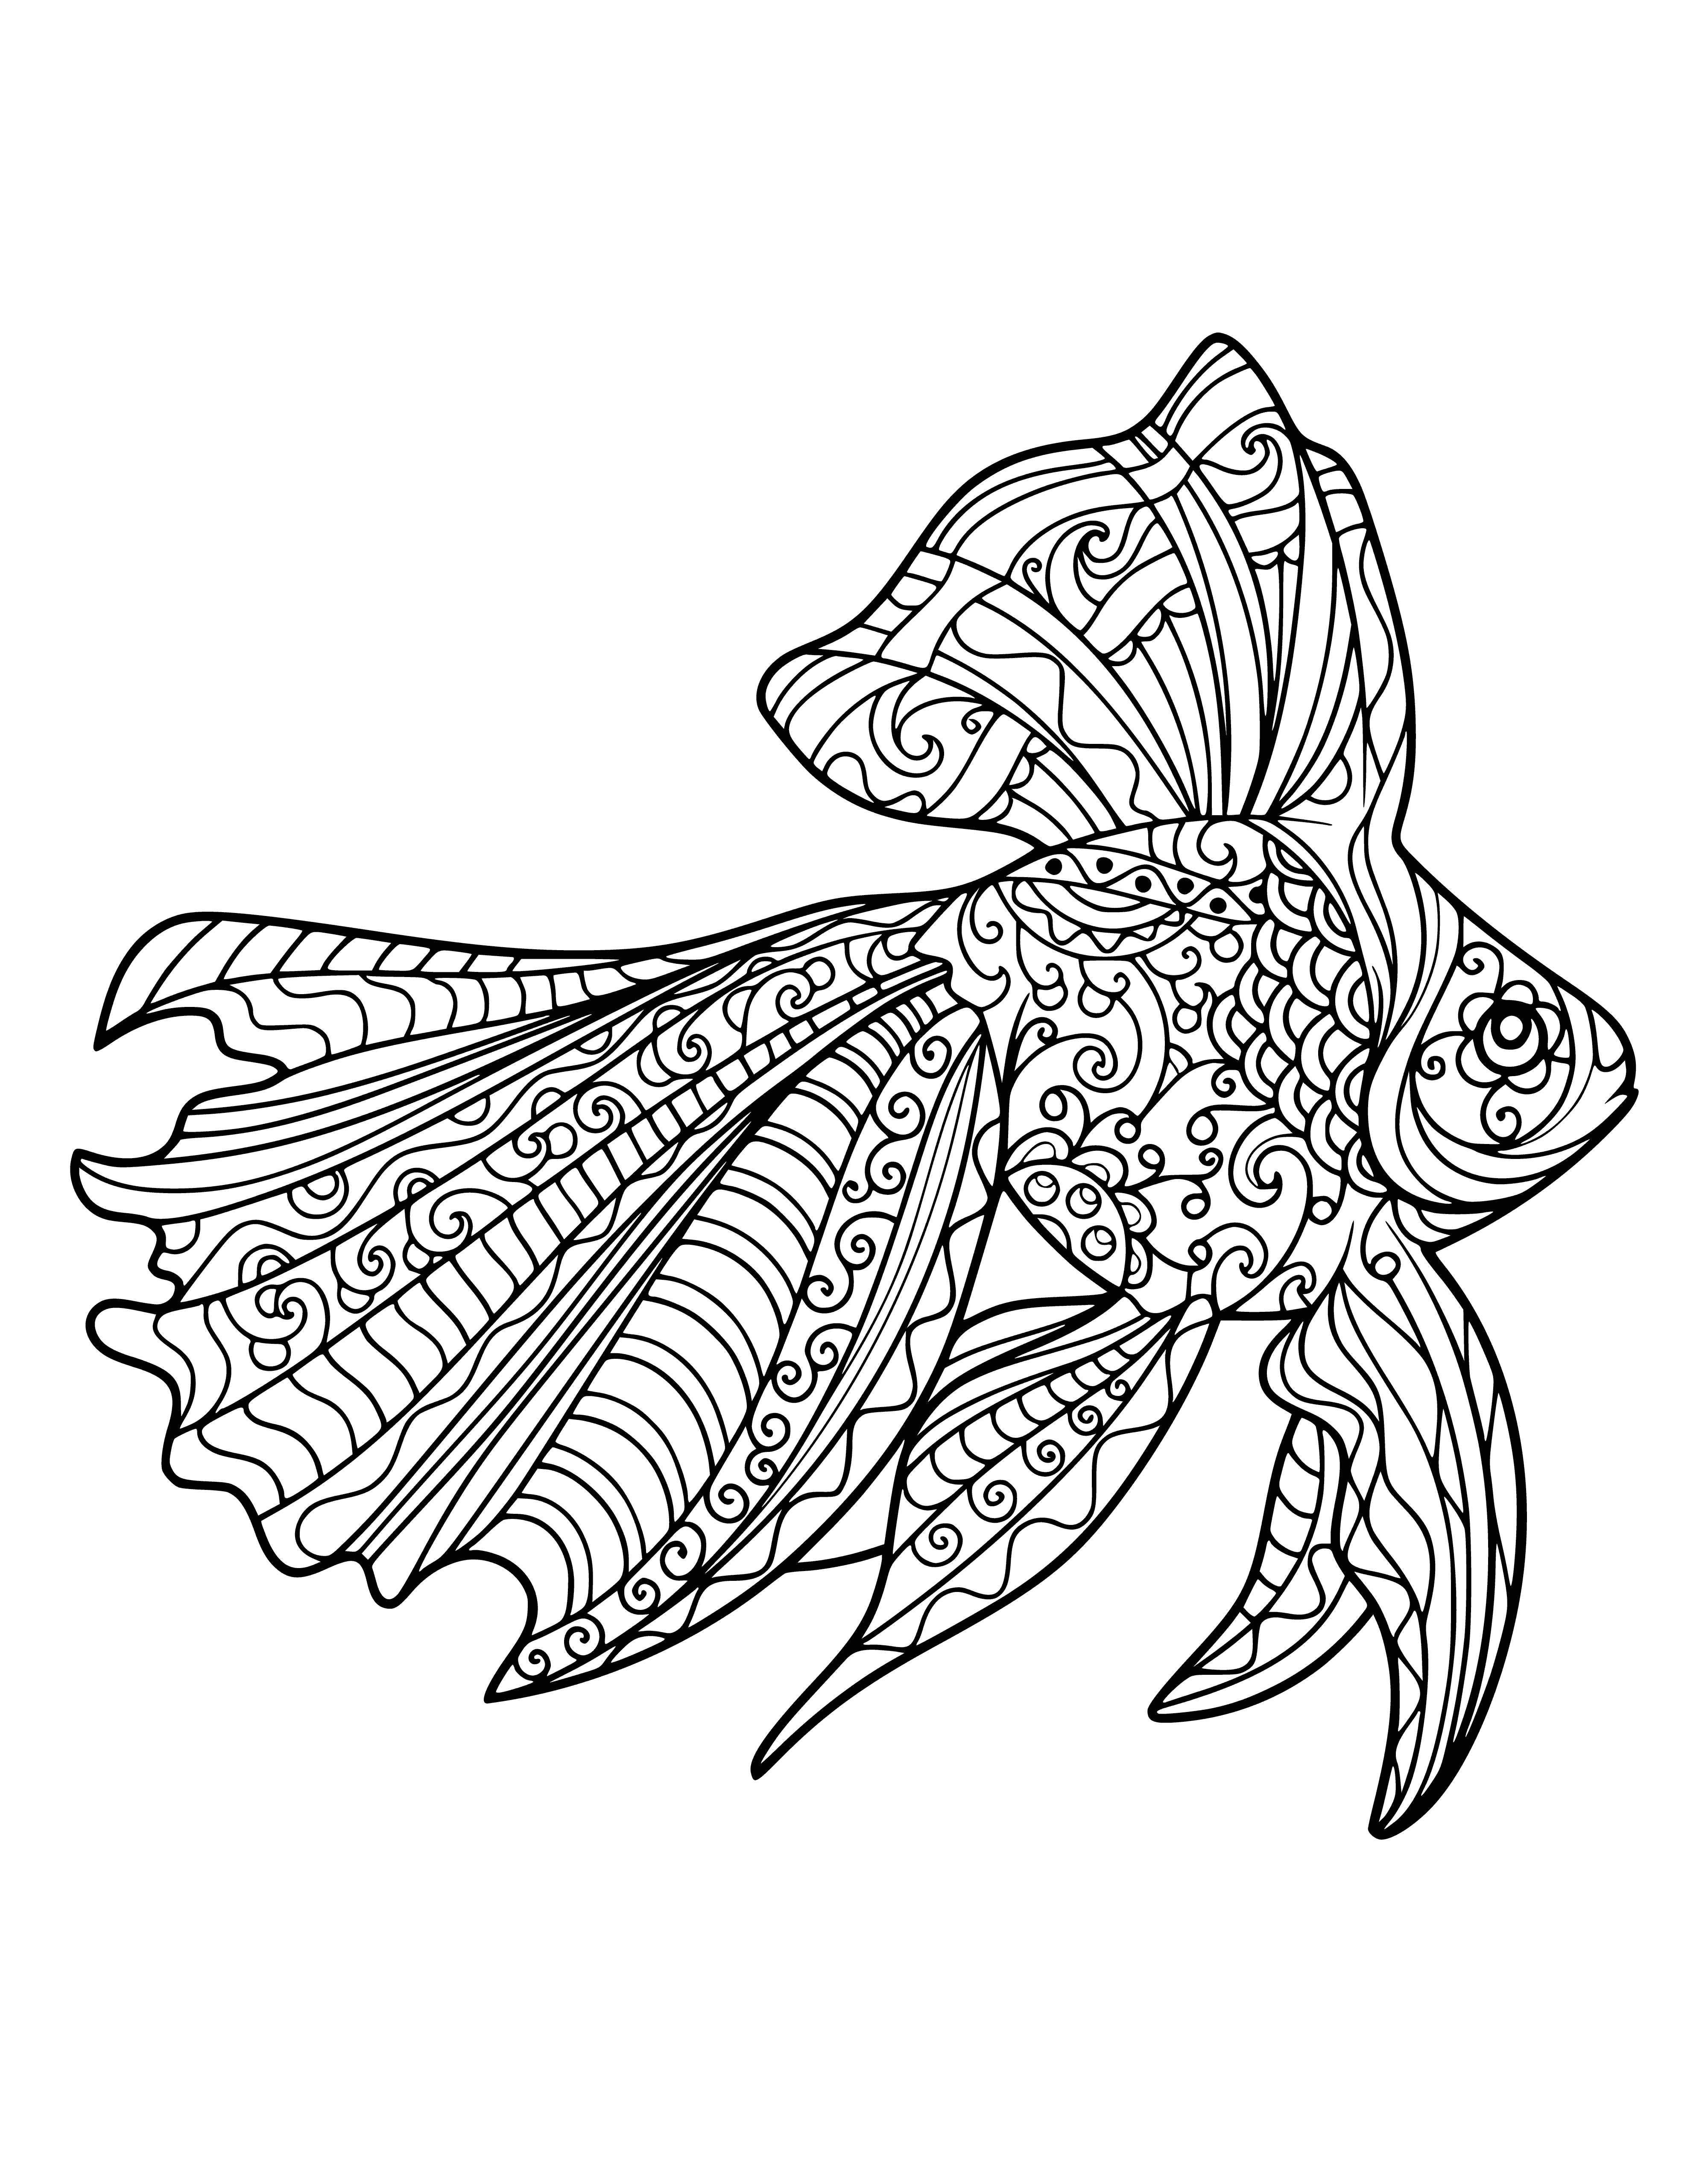 coloring page: Beautiful underwater scene w/ many fish, coral & plants! Perfect for anti-stress coloring projects w/ soft colors & intricate patterns.